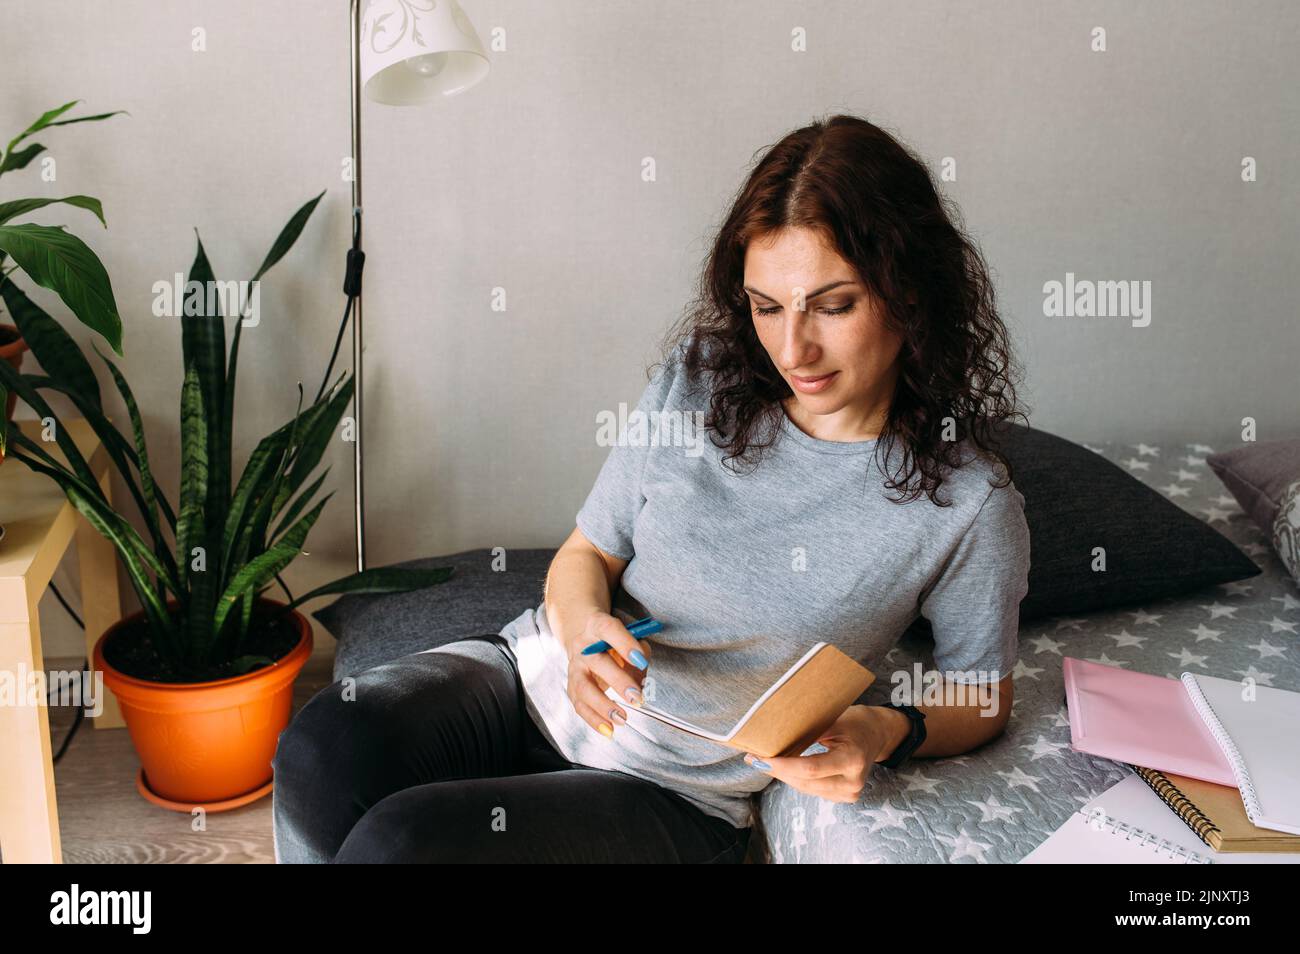 Woman working from home studying. Advanced training, retraining profession. Stock Photo